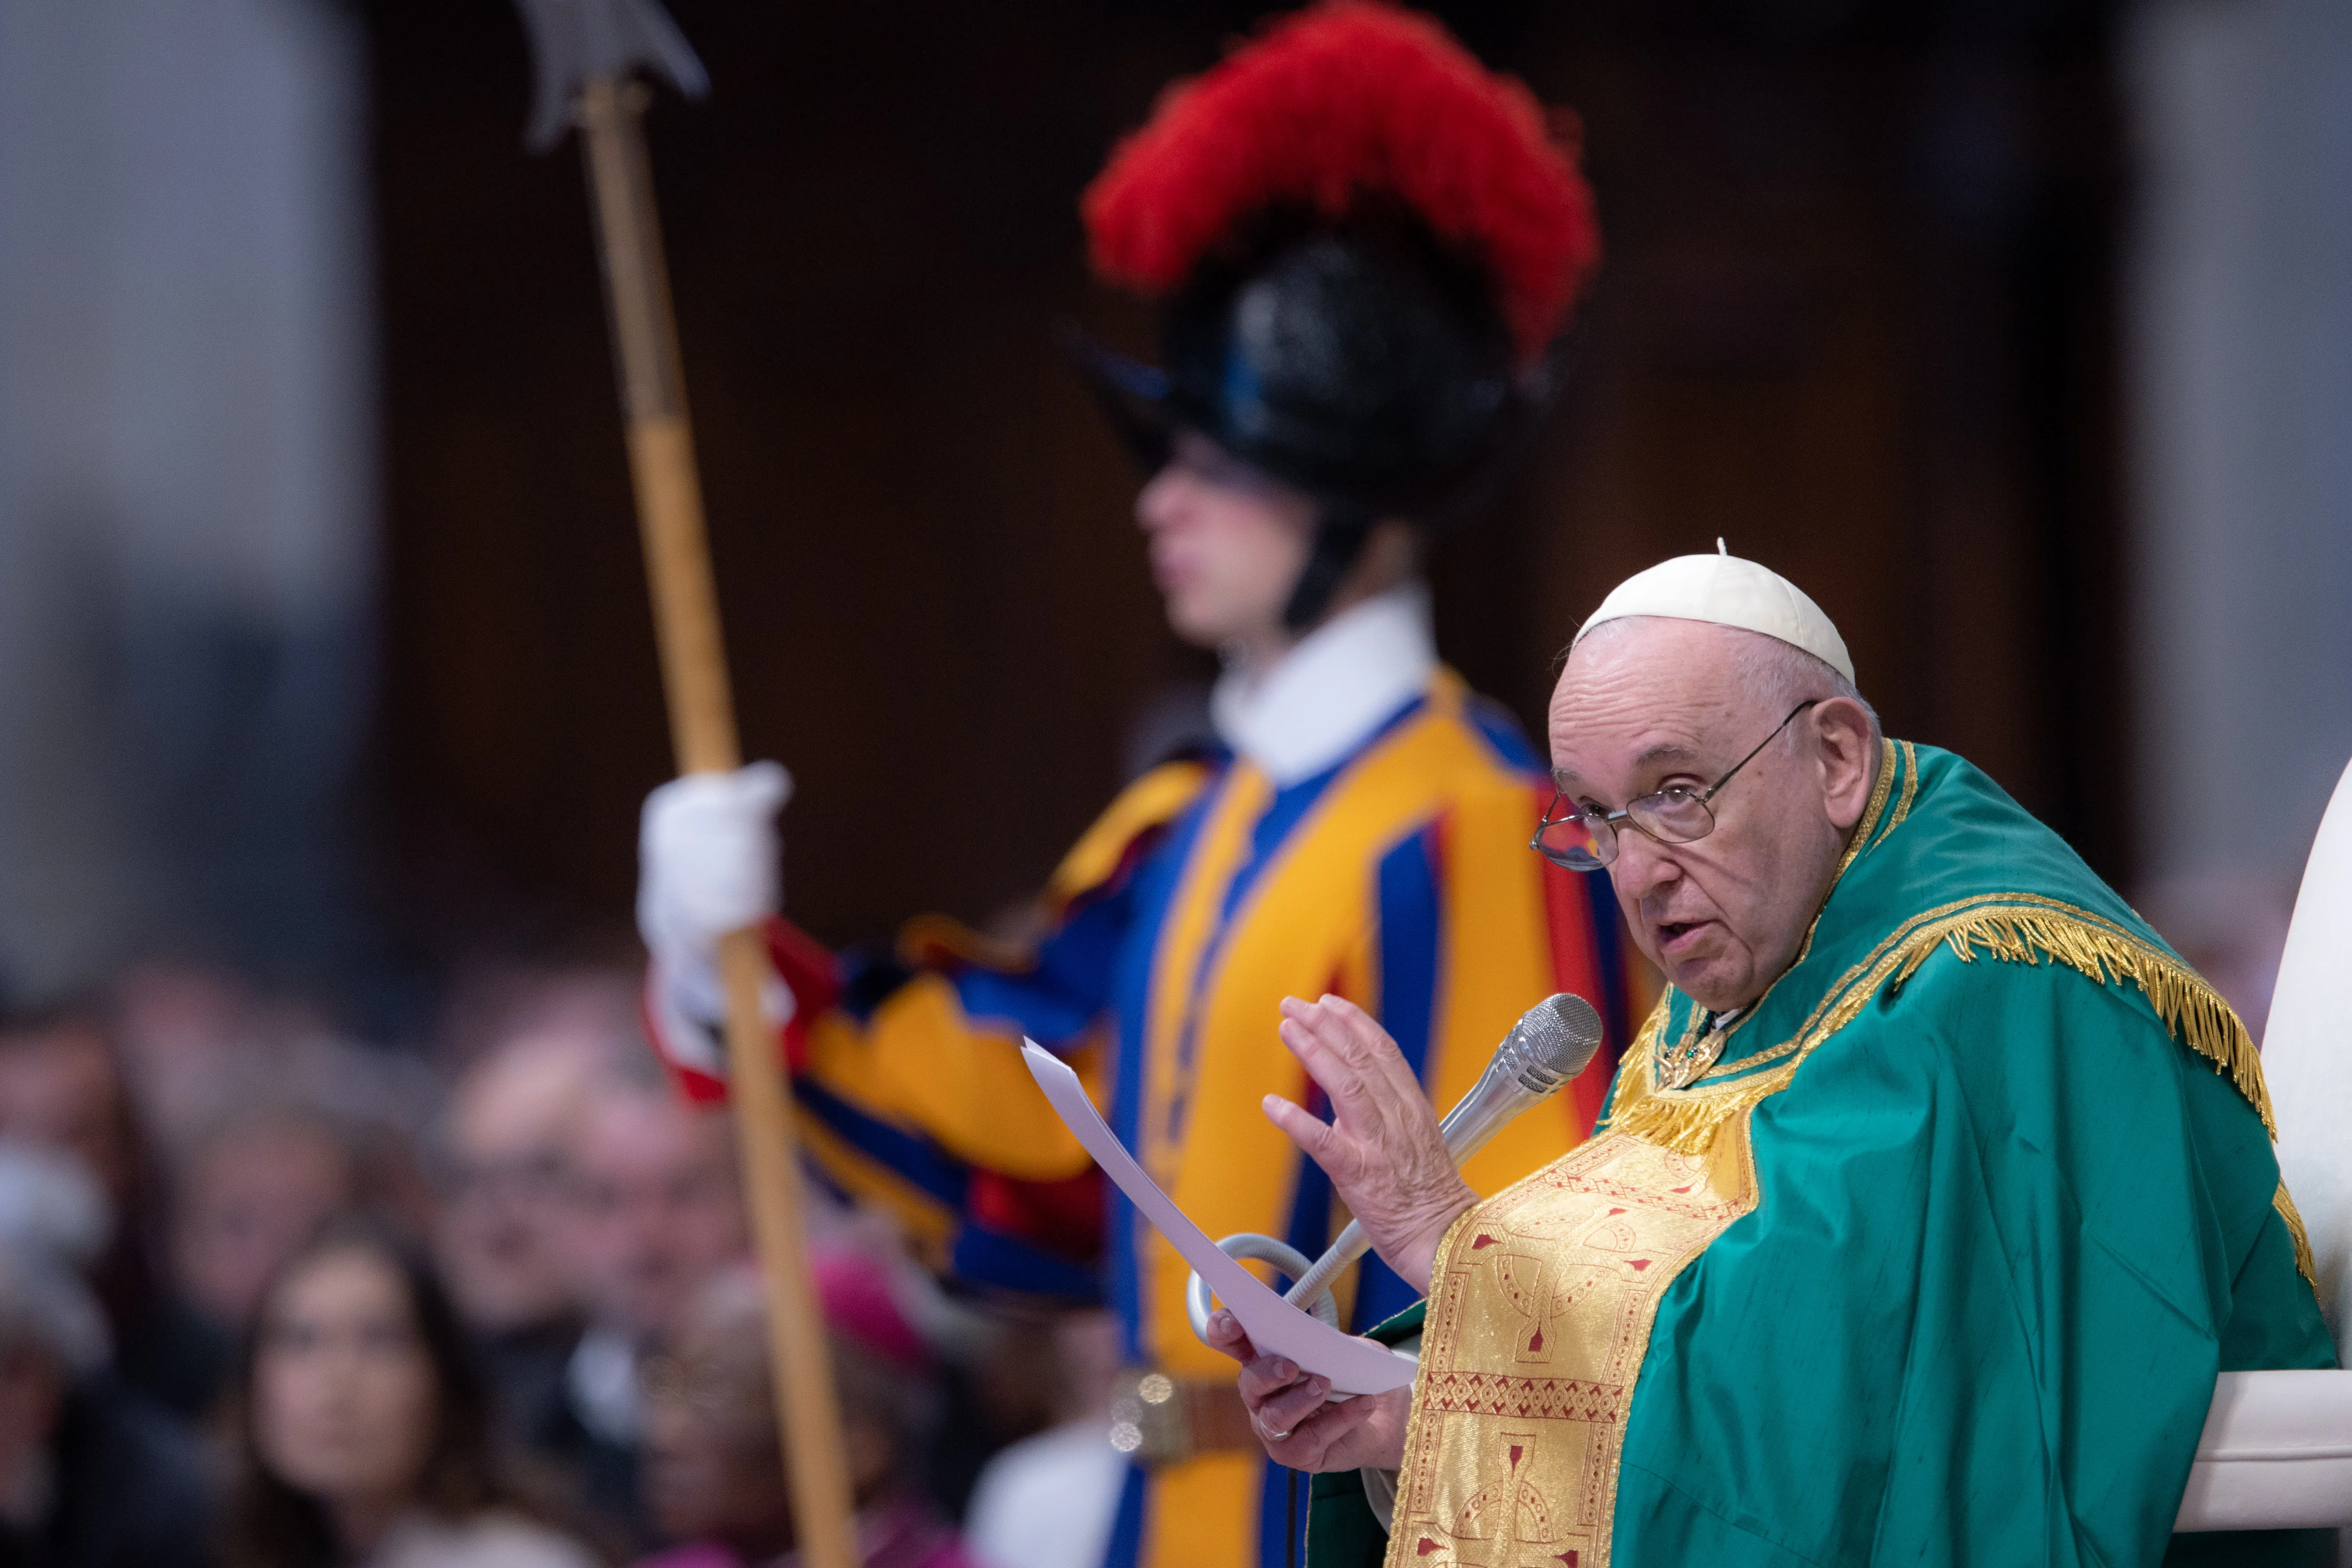 Pope Francis celebrates Mass in St. Peter's Basilica for the World Day of the Poor Nov. 13, 2022.?w=200&h=150